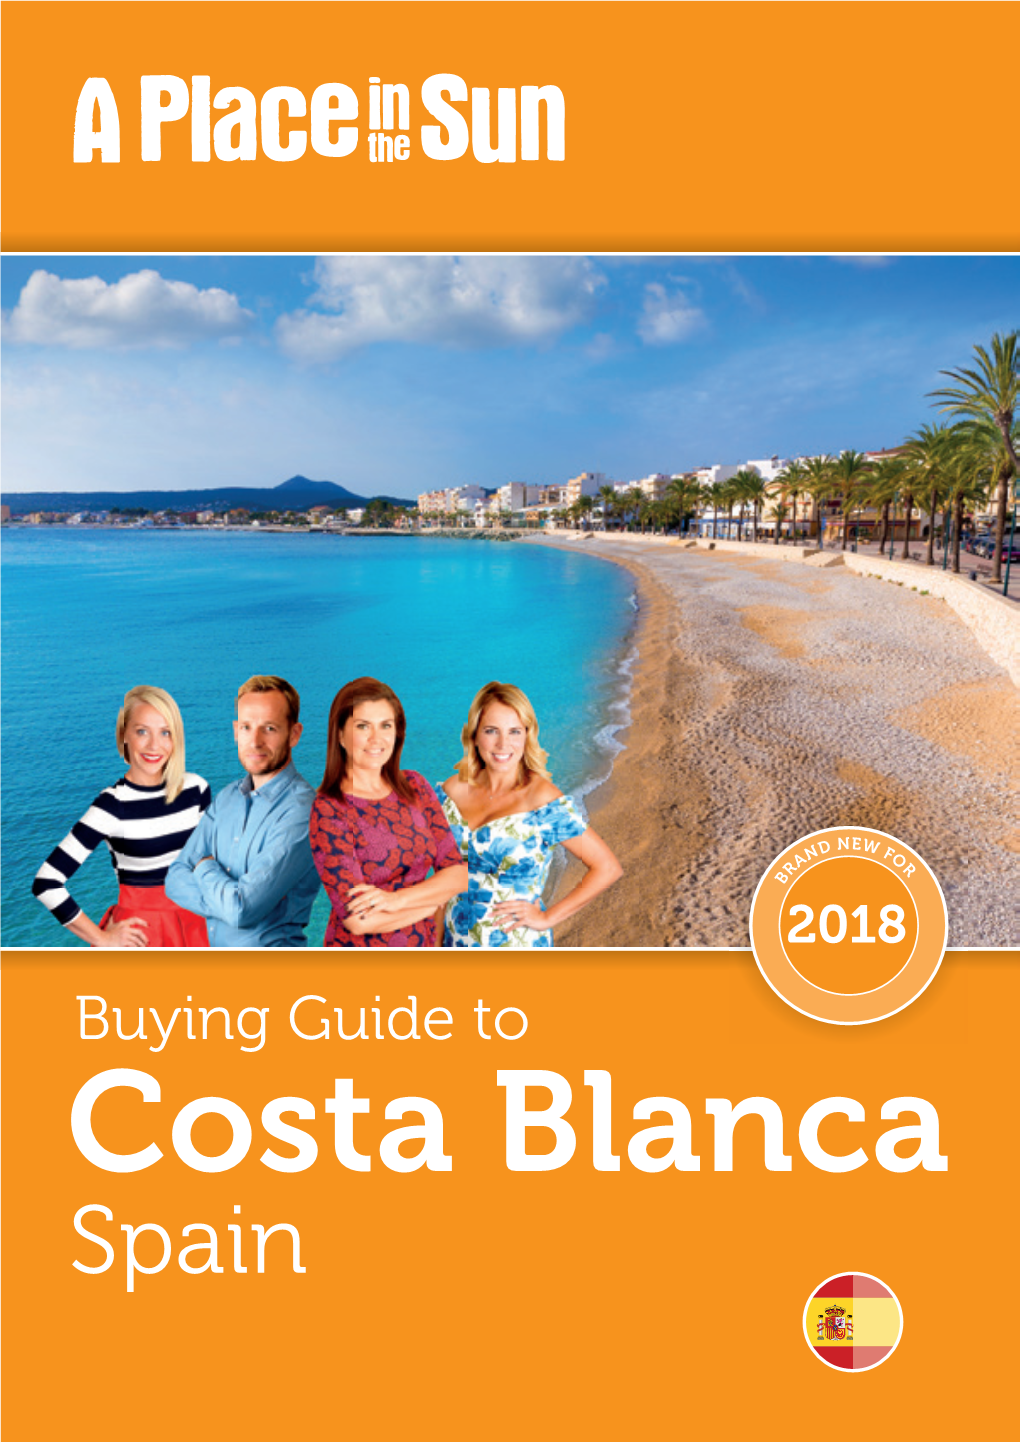 Buying Guide for Costa Blanca